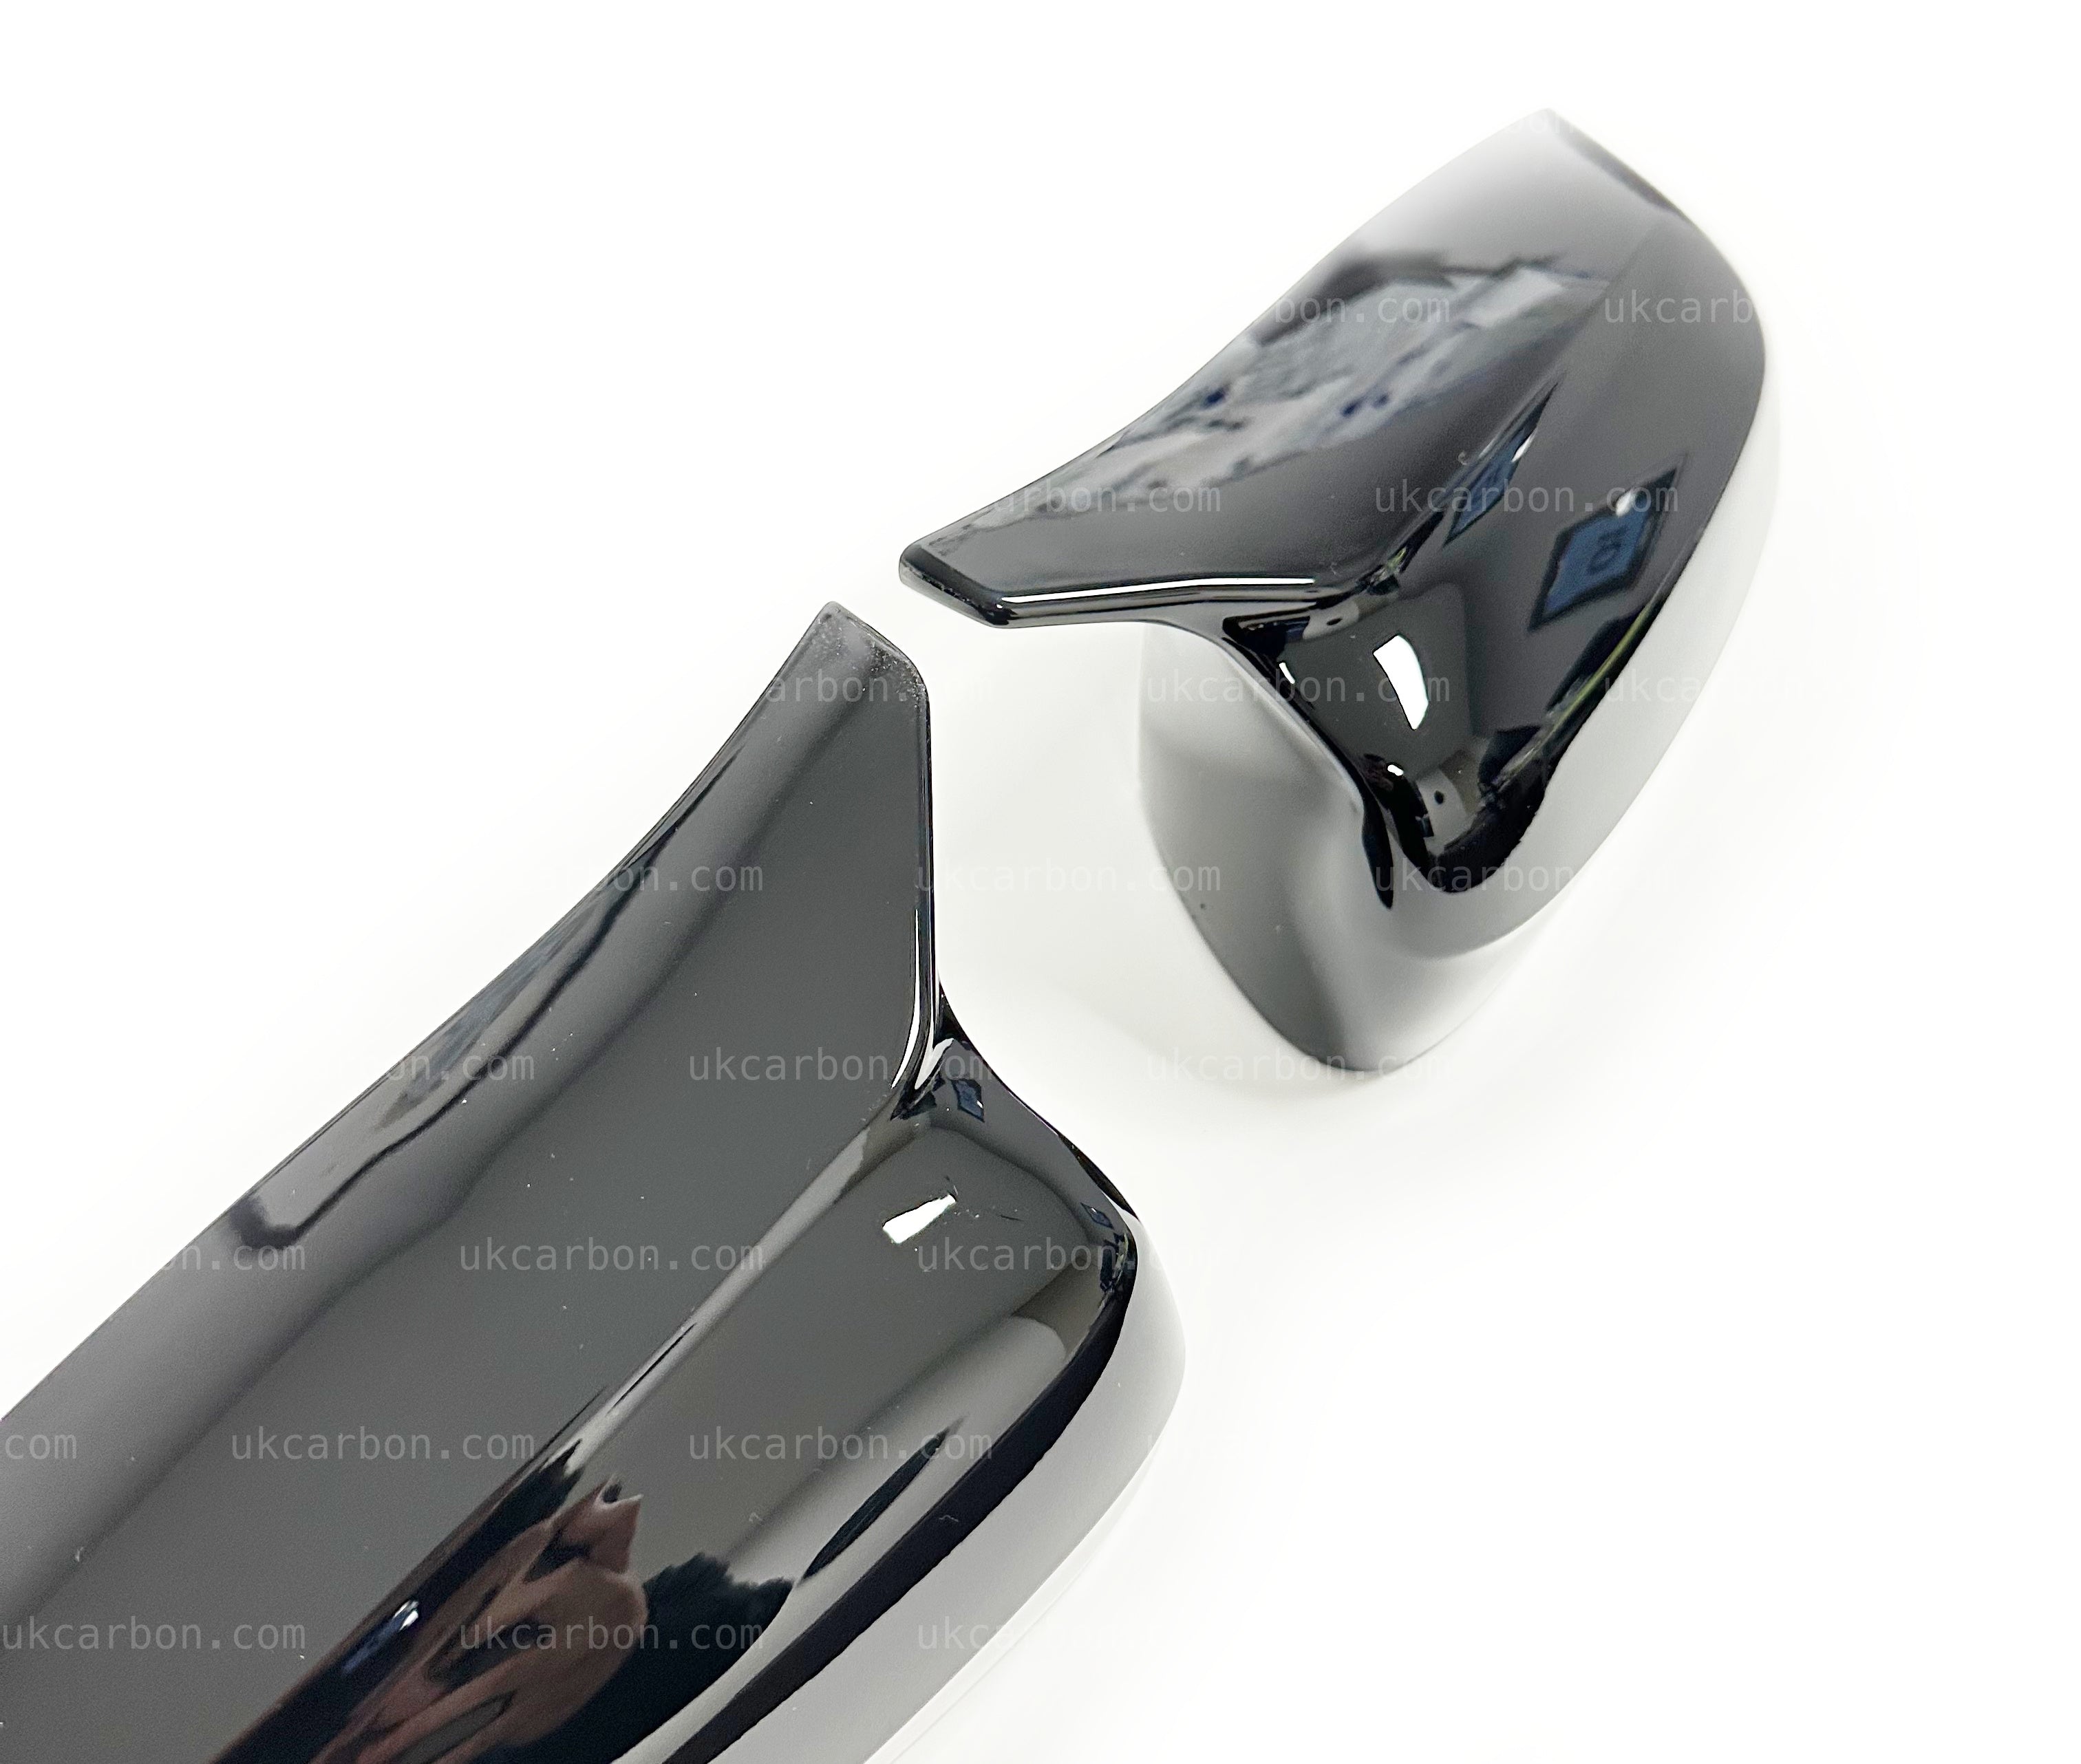 BMW 5 Series Gloss Black M Style Wing Mirror Cover Replacements G32 by UKCarbon